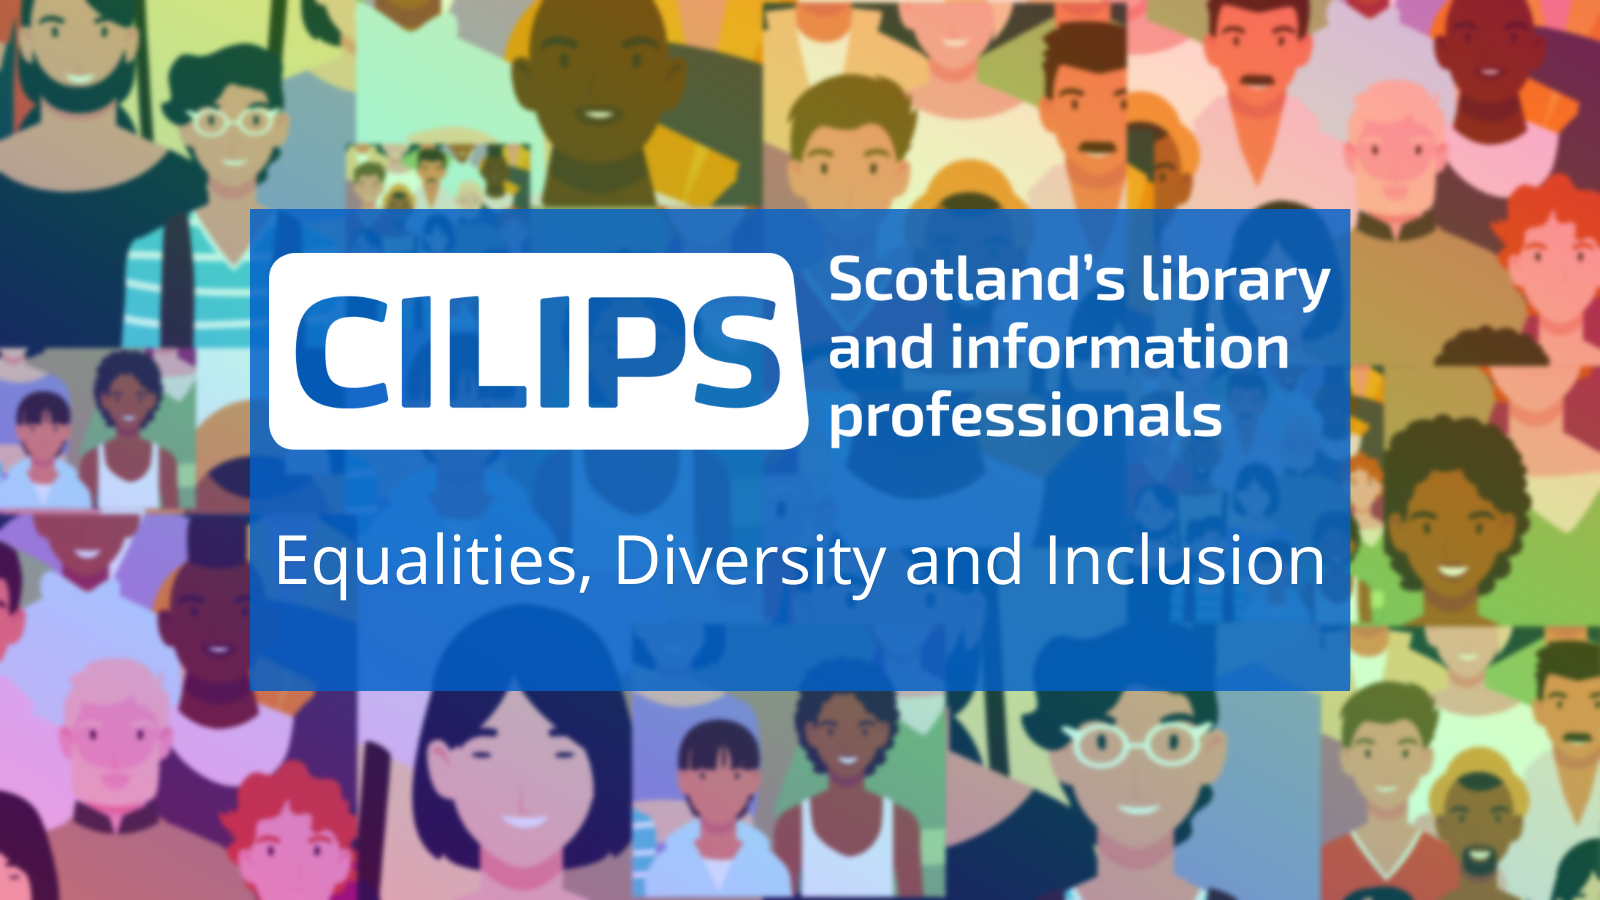 The CILIP Scotland EDI commitment logo, with white text in a blue rectangle in front of an illustrated crowd